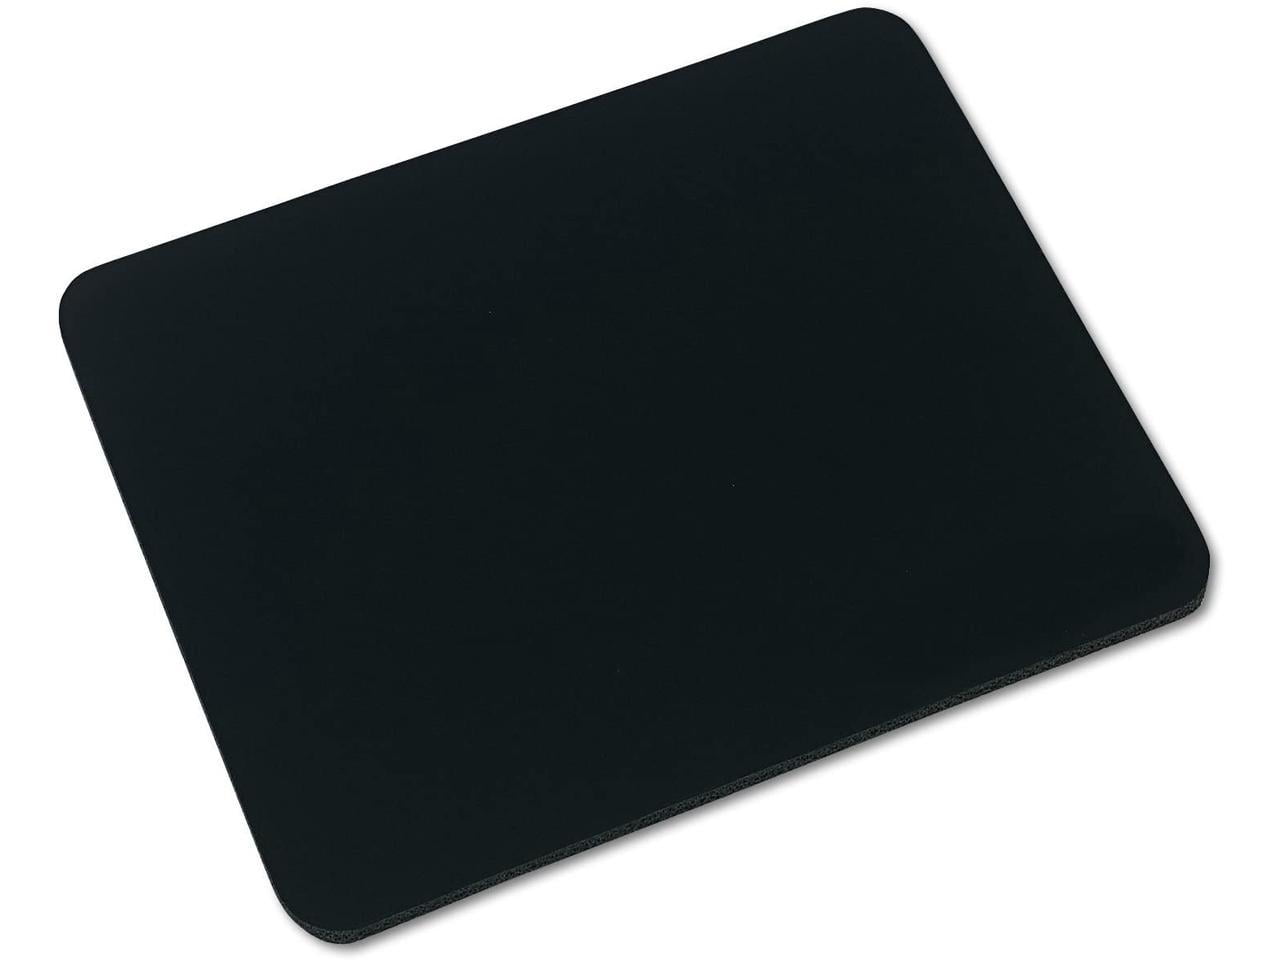 Innovera® IVR51450 Gel Mouse Pad with Wrist Rest, Non-Skid Base, Black